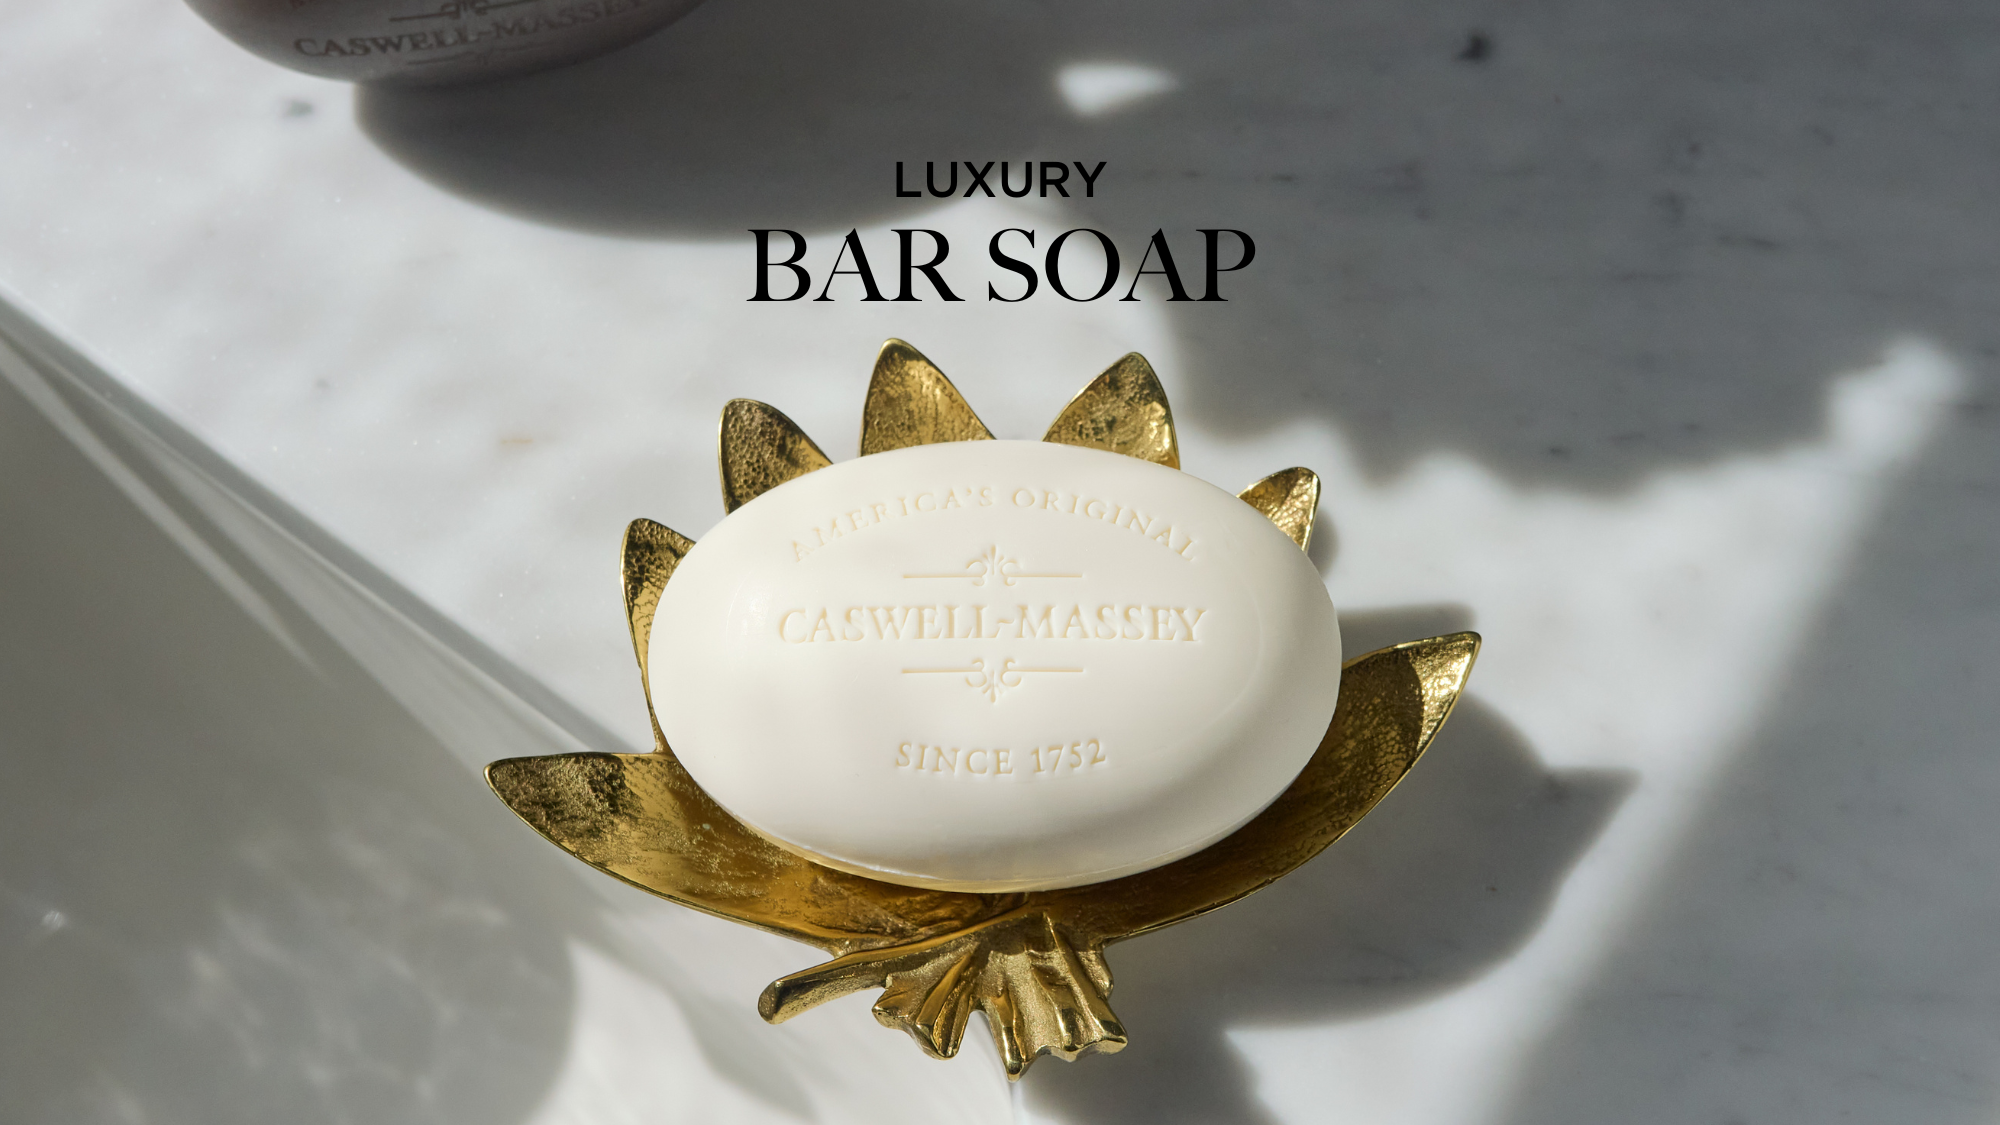 Caswell-Massey Luxury Almond Bar Soap: White oval bar soap shown sitting on antique brass soap dish